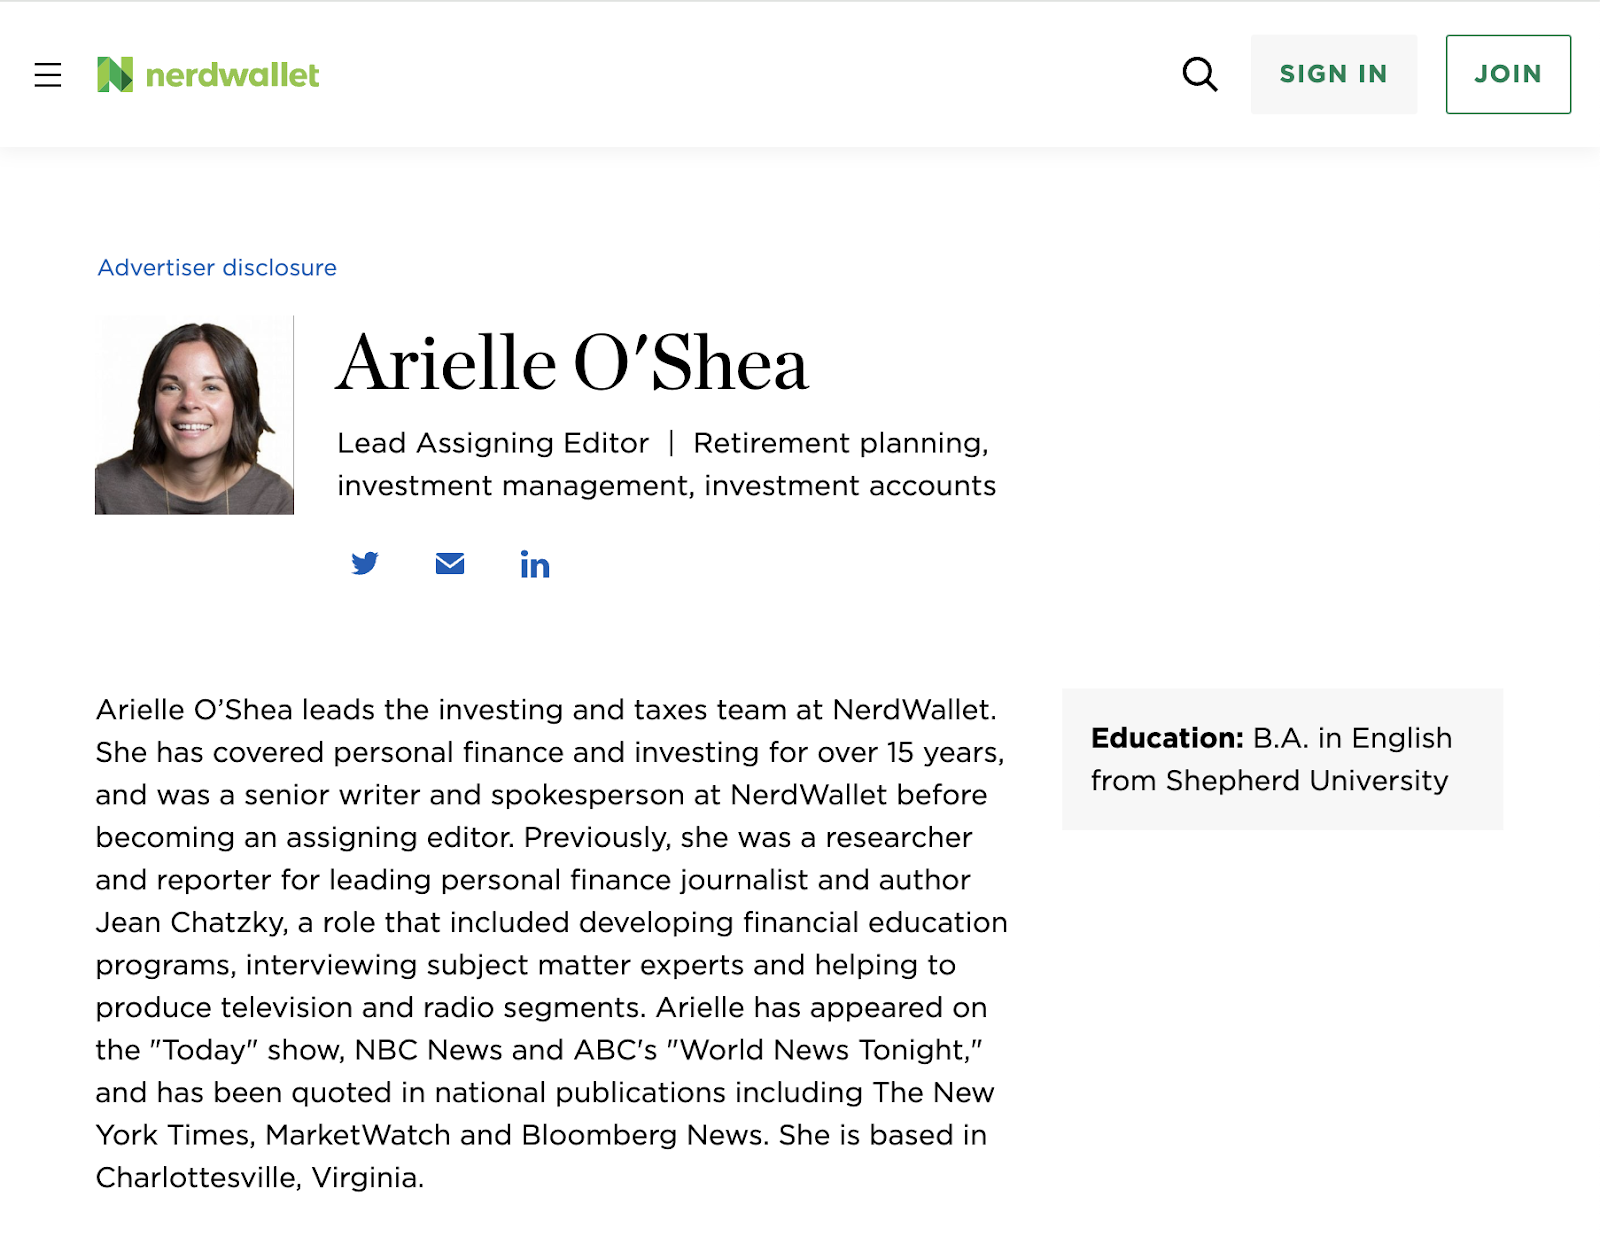 Author bio for an editor at Nerdwallet shows her education, her areas of expertise, and previous publications